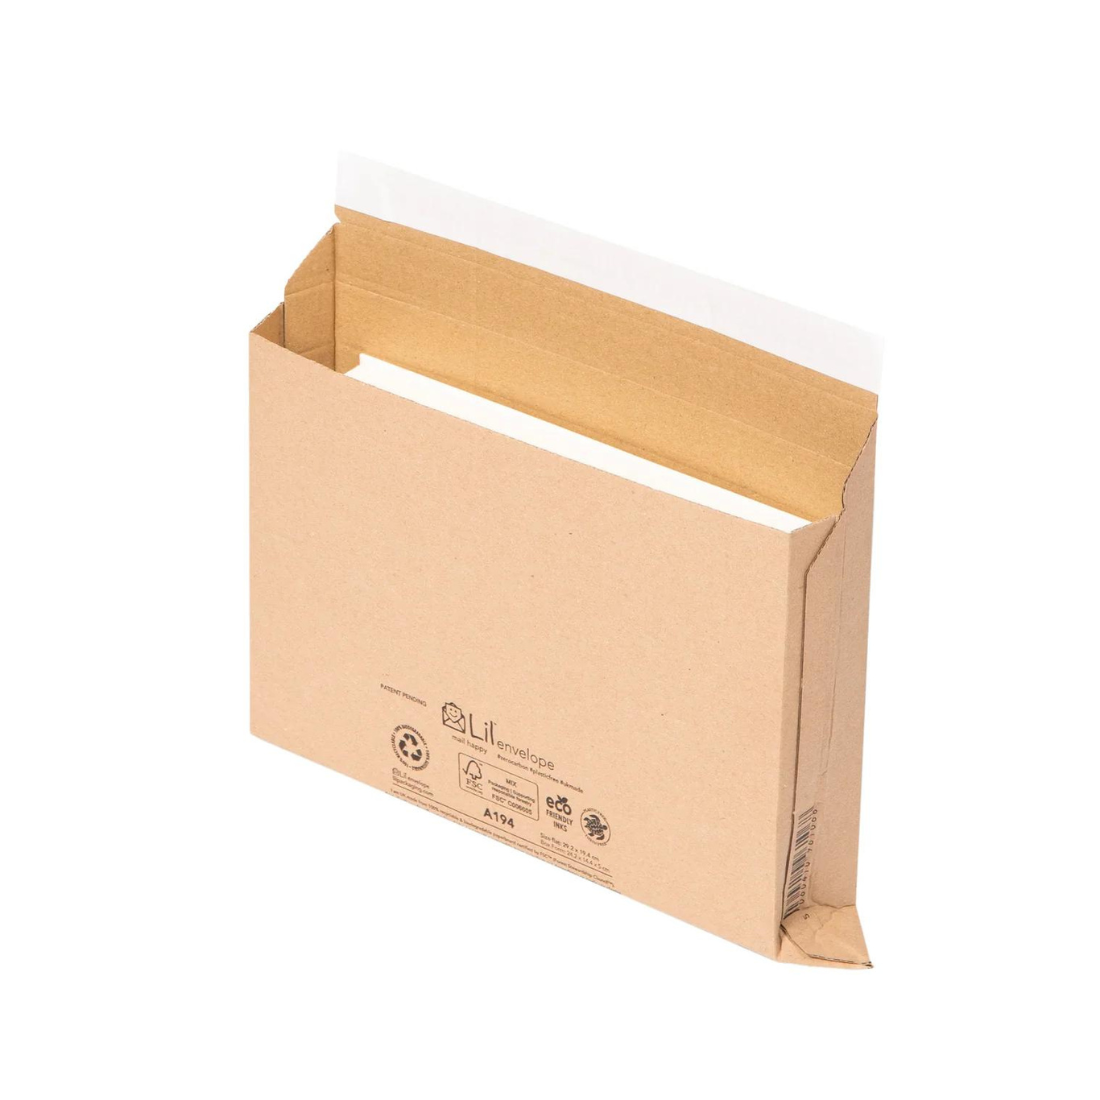 A194 (292x194mm) book mailer - Perfect for paperback books and magazines of up to 500 pages (PACK OF 50)